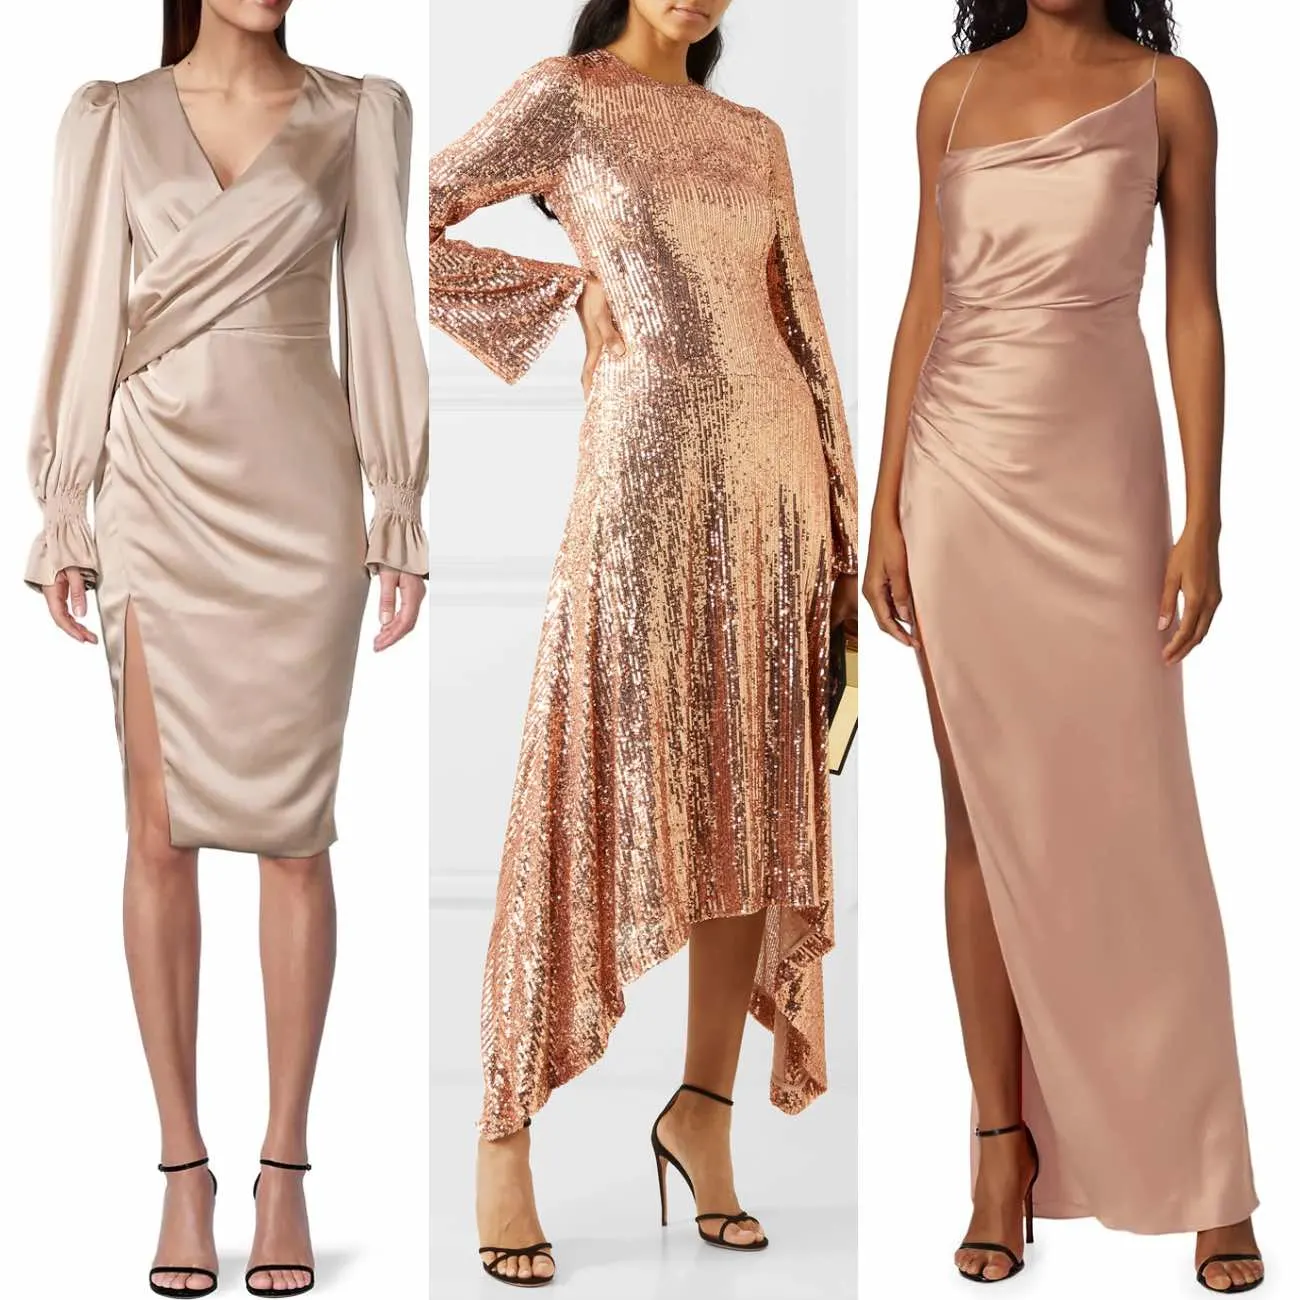 What Color Shoes Go with Rose Gold Dress Outfits - 10 Favorites!